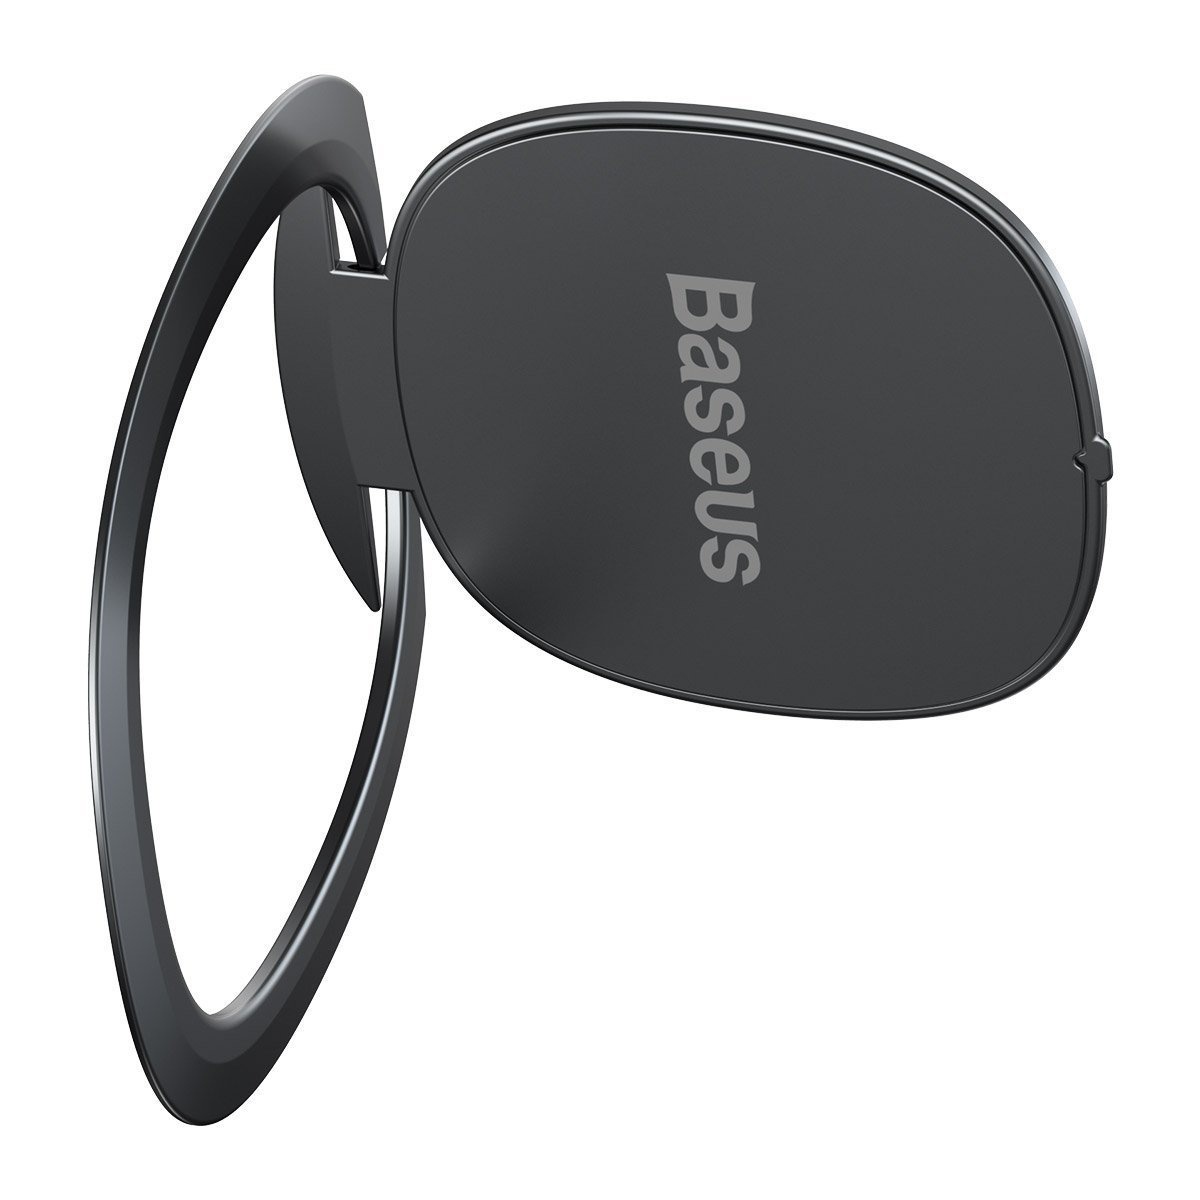 Baseus Invisible Ring Holder for smartphones (tarnish)